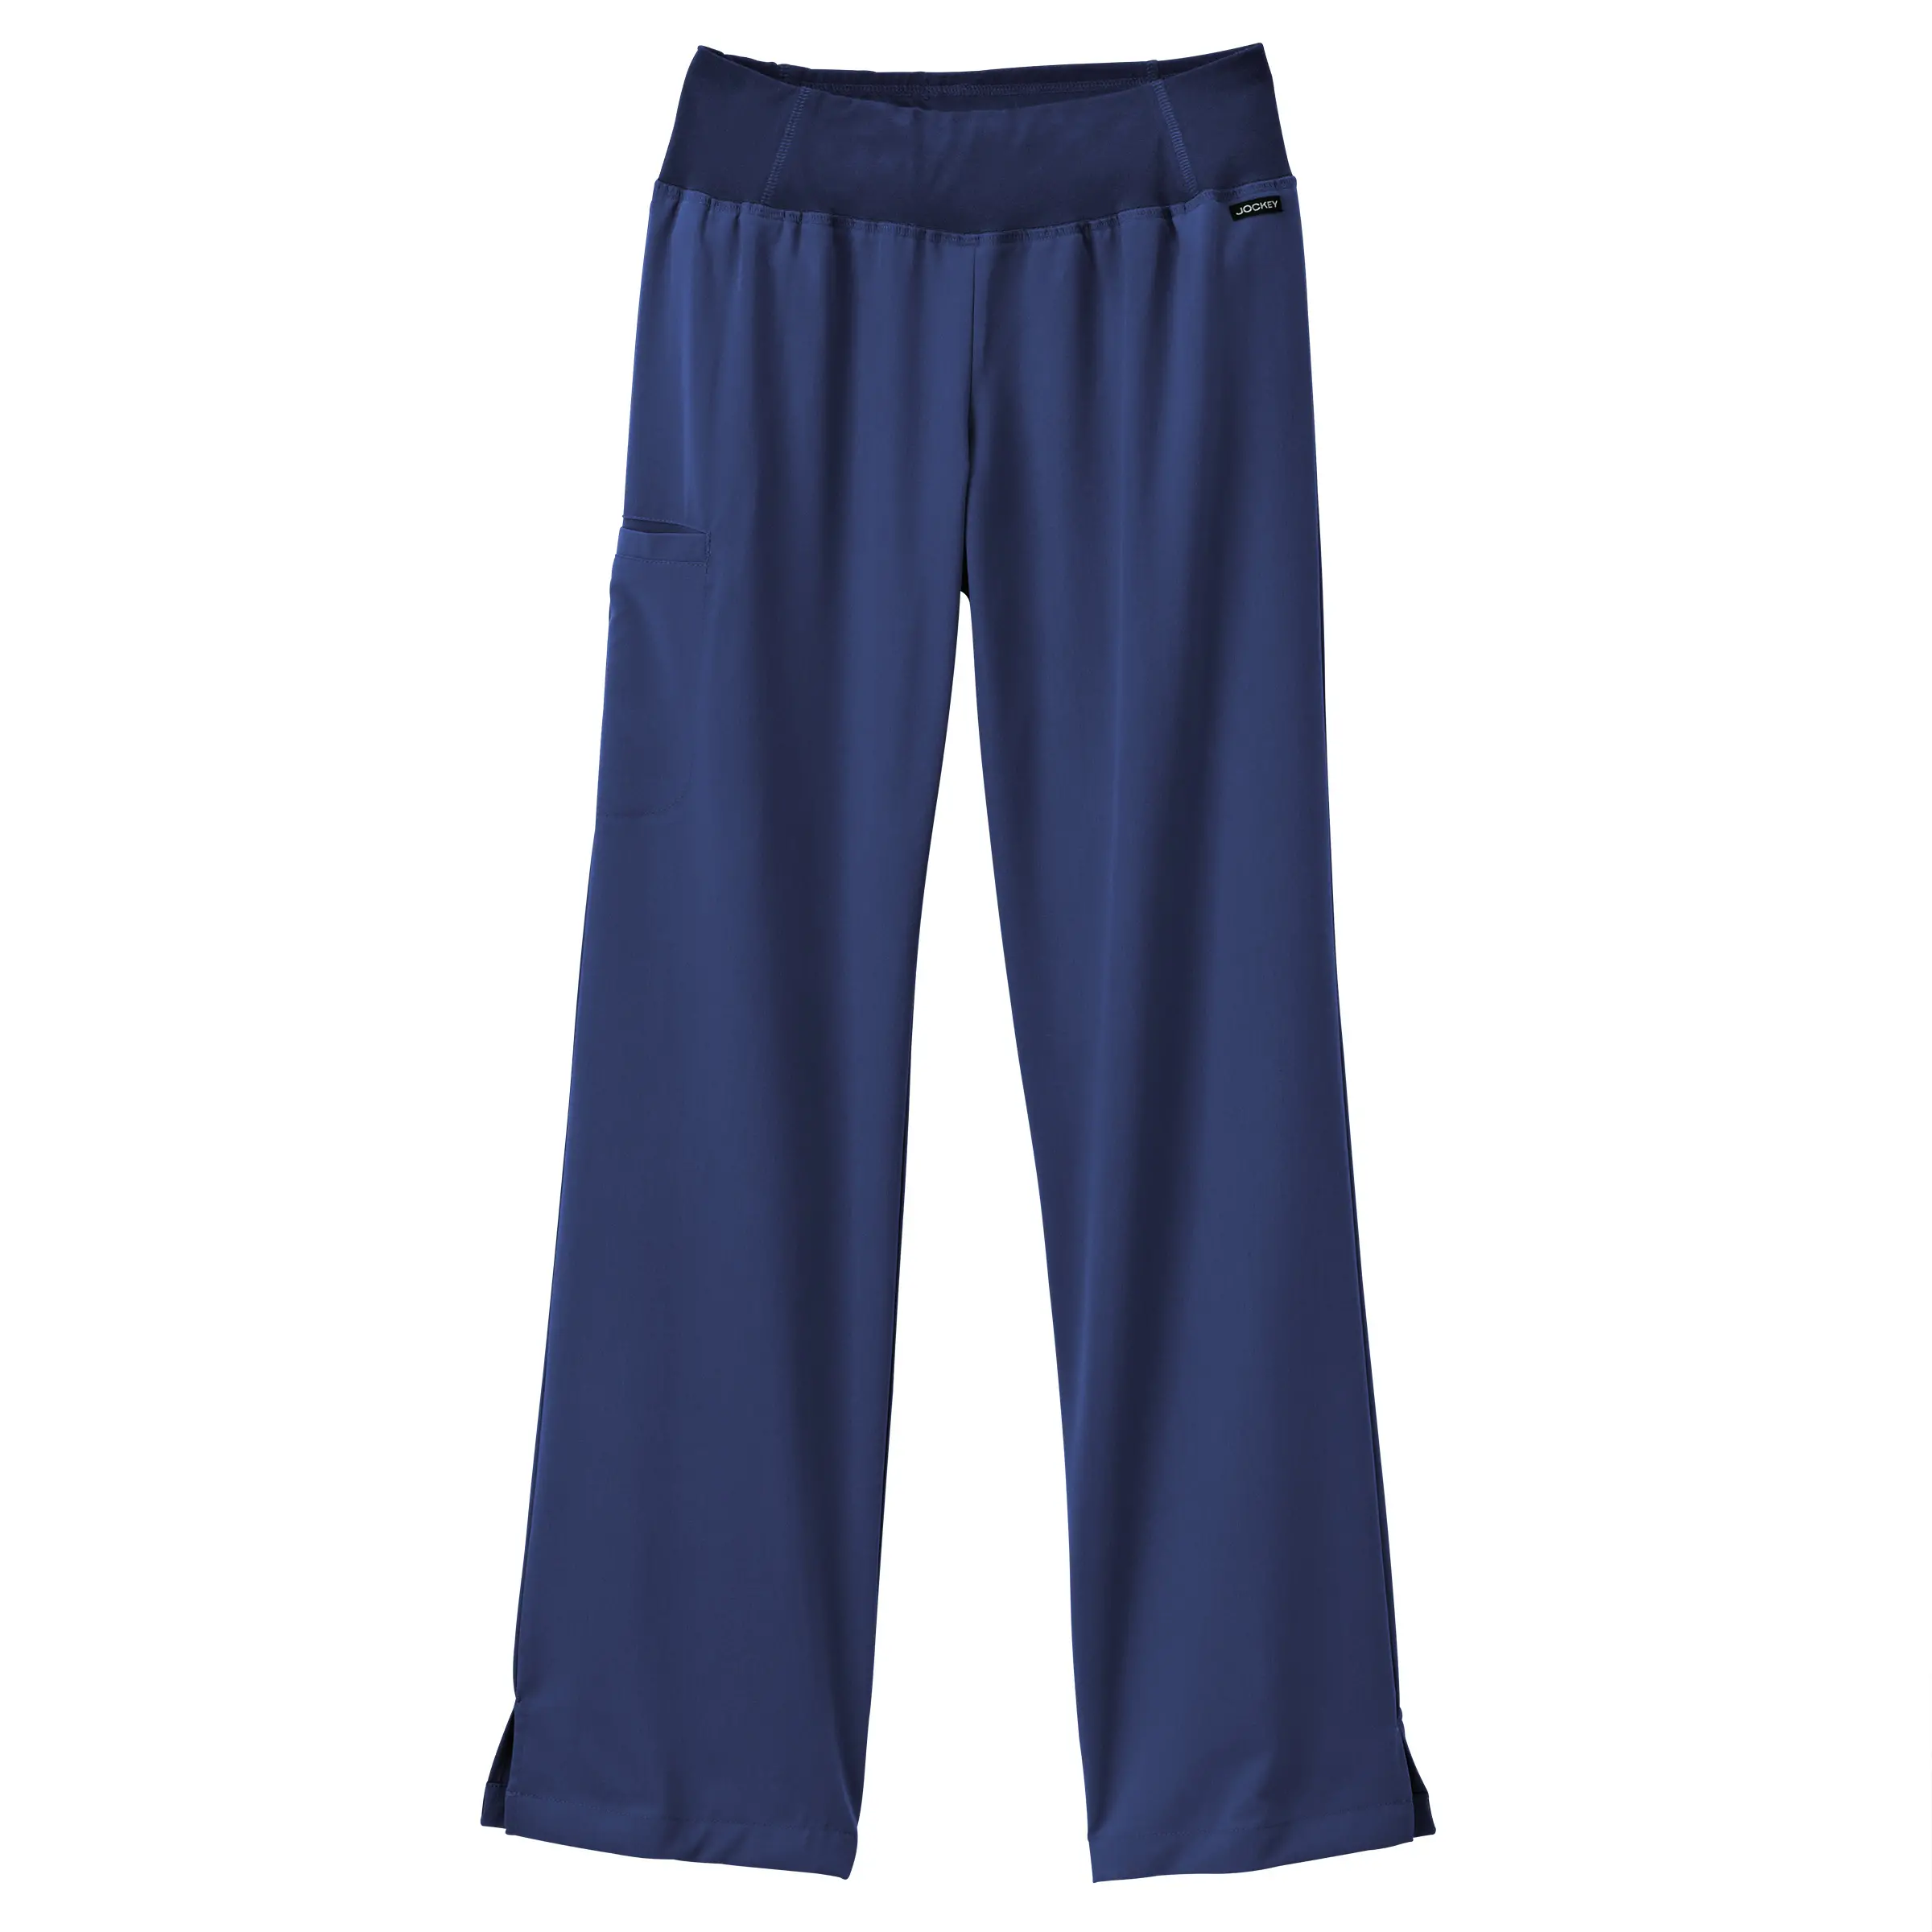 Buy Women's Scrub Pants from Marcus Uniforms - Free shipping on orders $99+